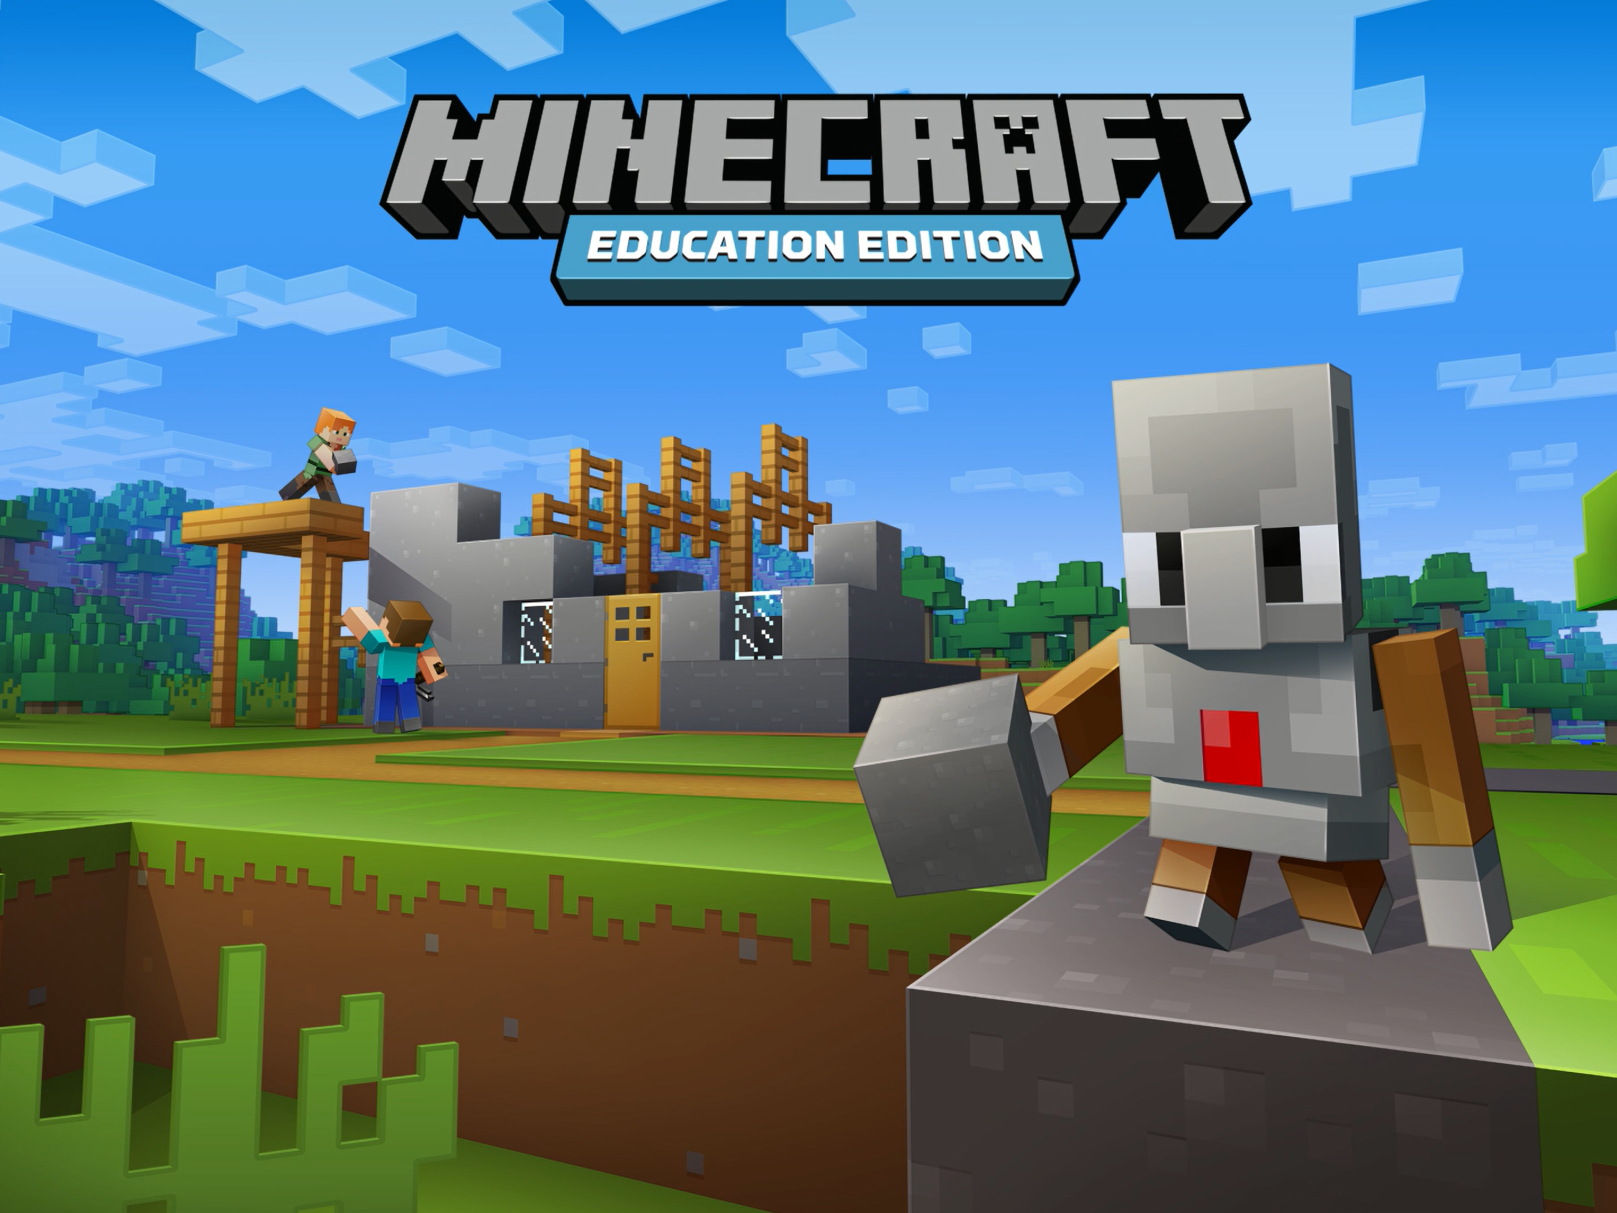 Coronavirus: Free educational Minecraft games announced for children amid  school closures, The Independent